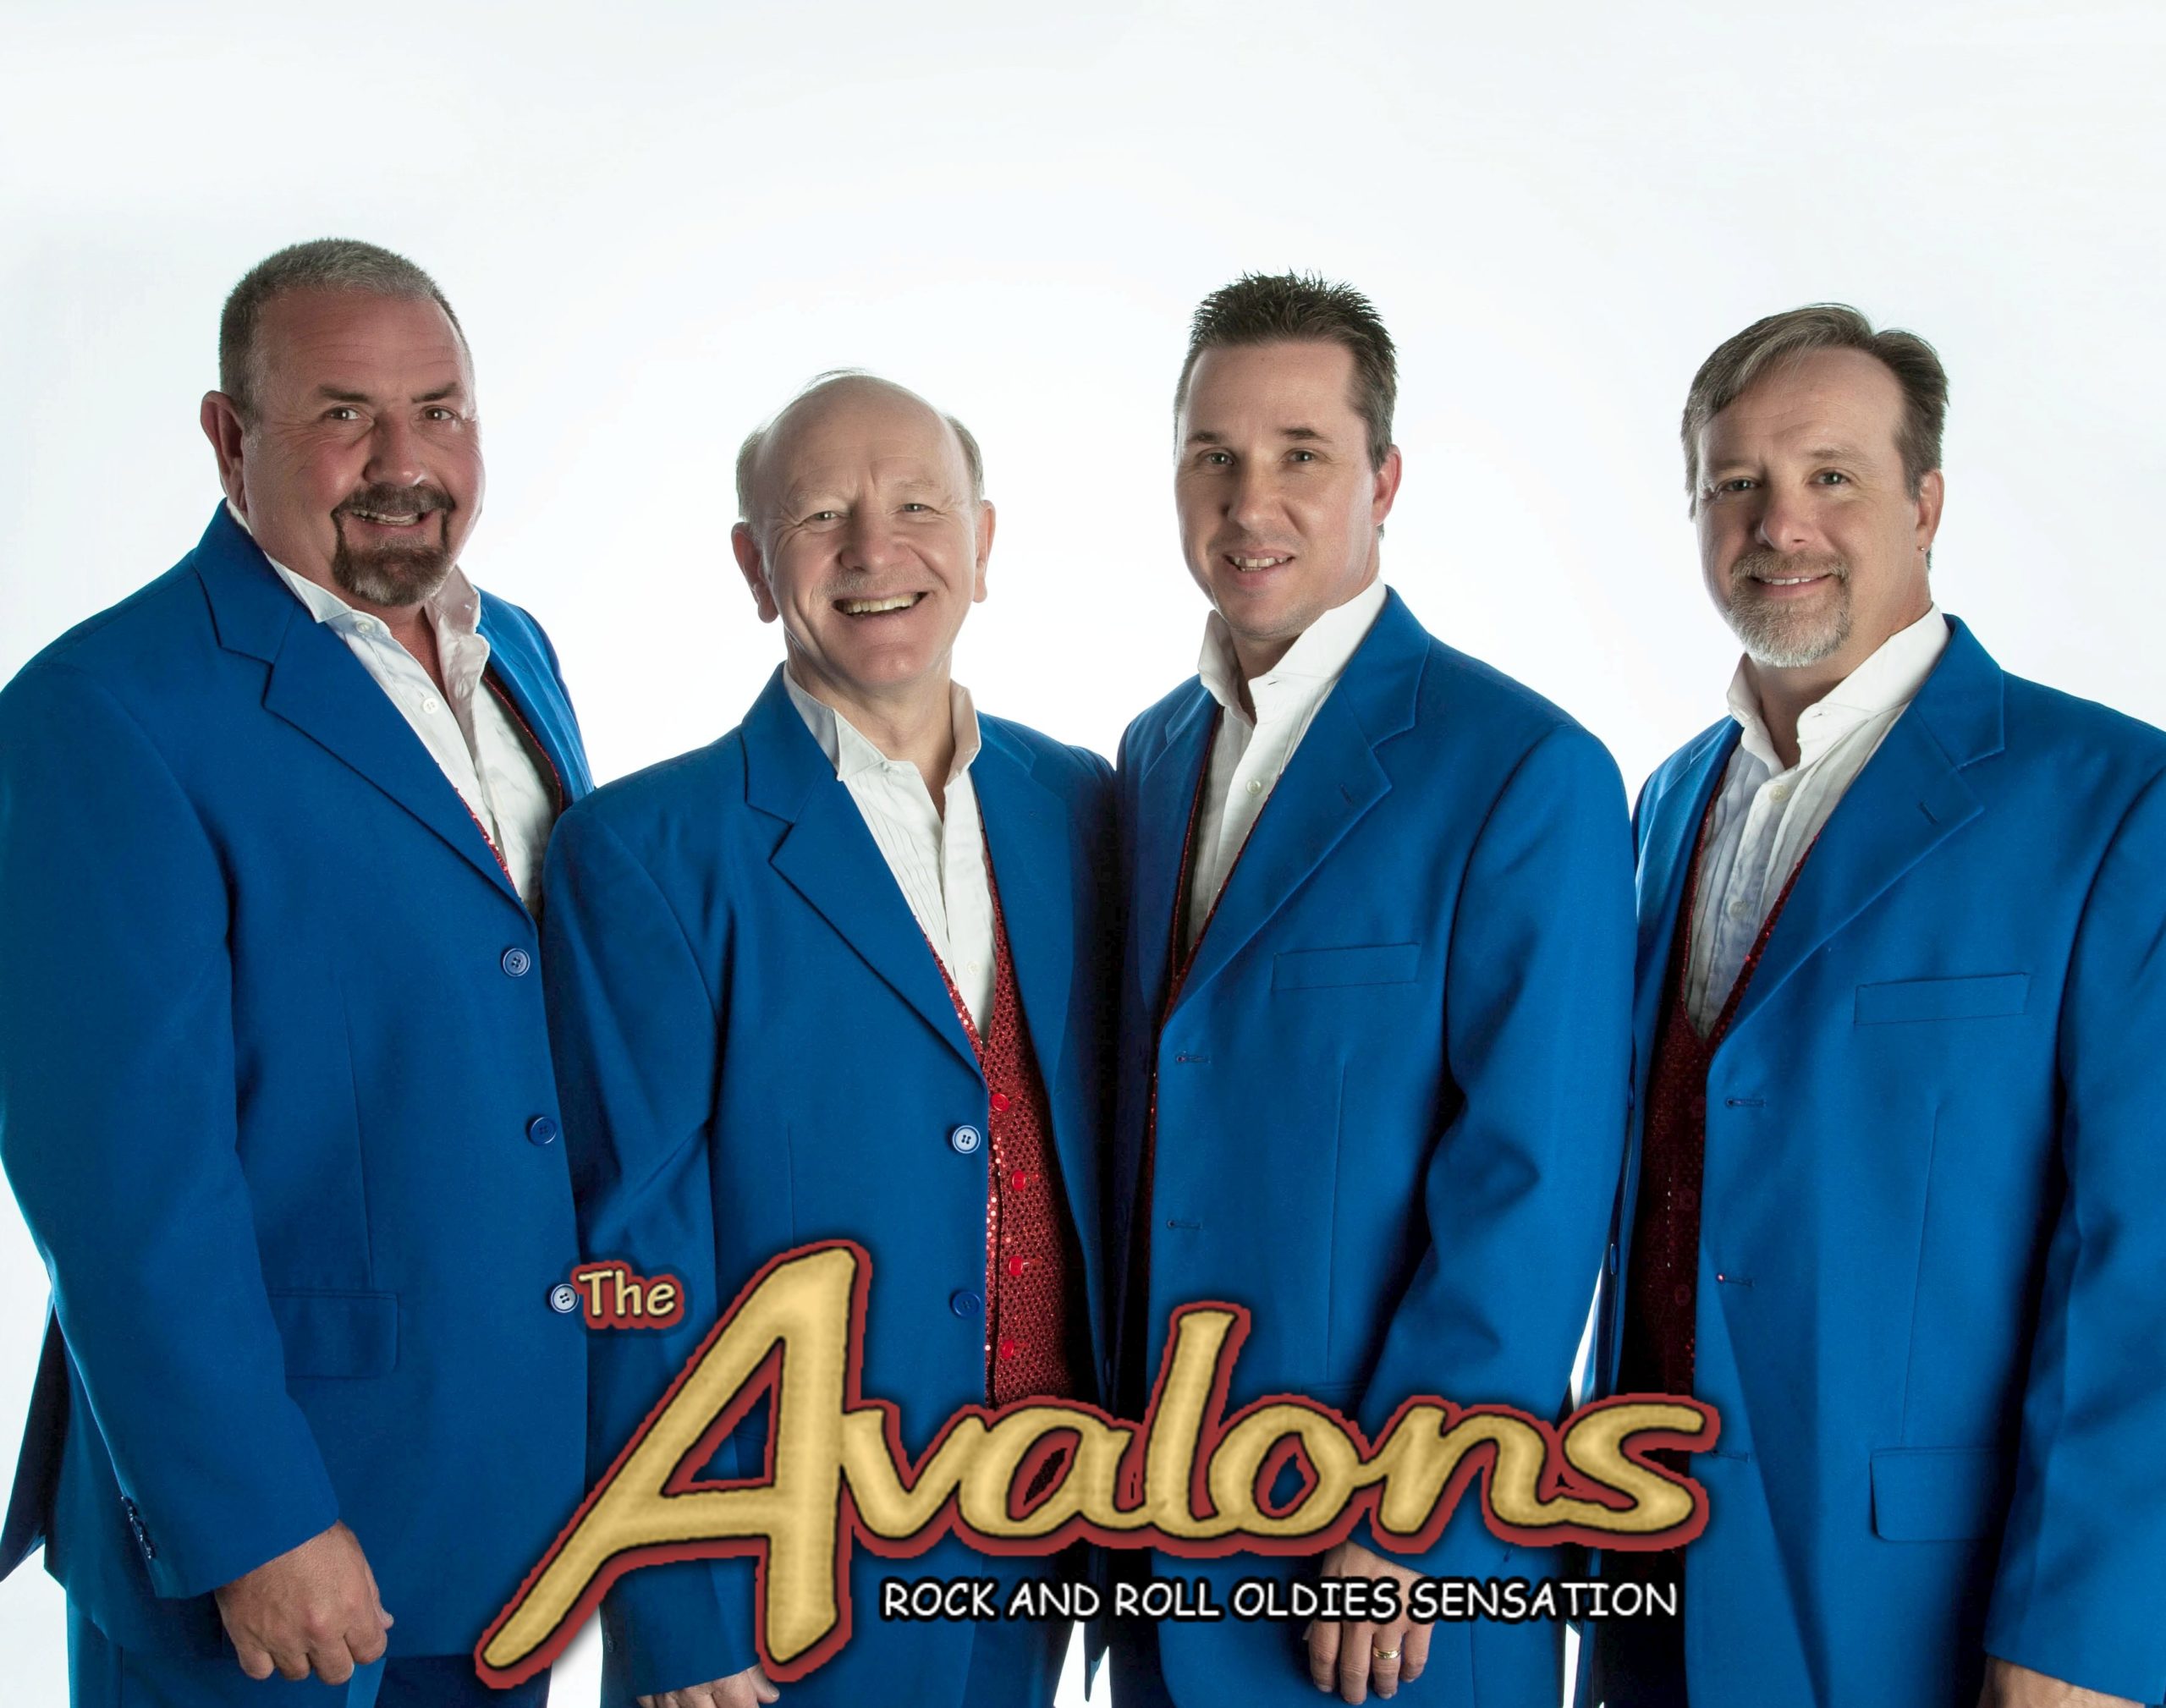 The Avalons